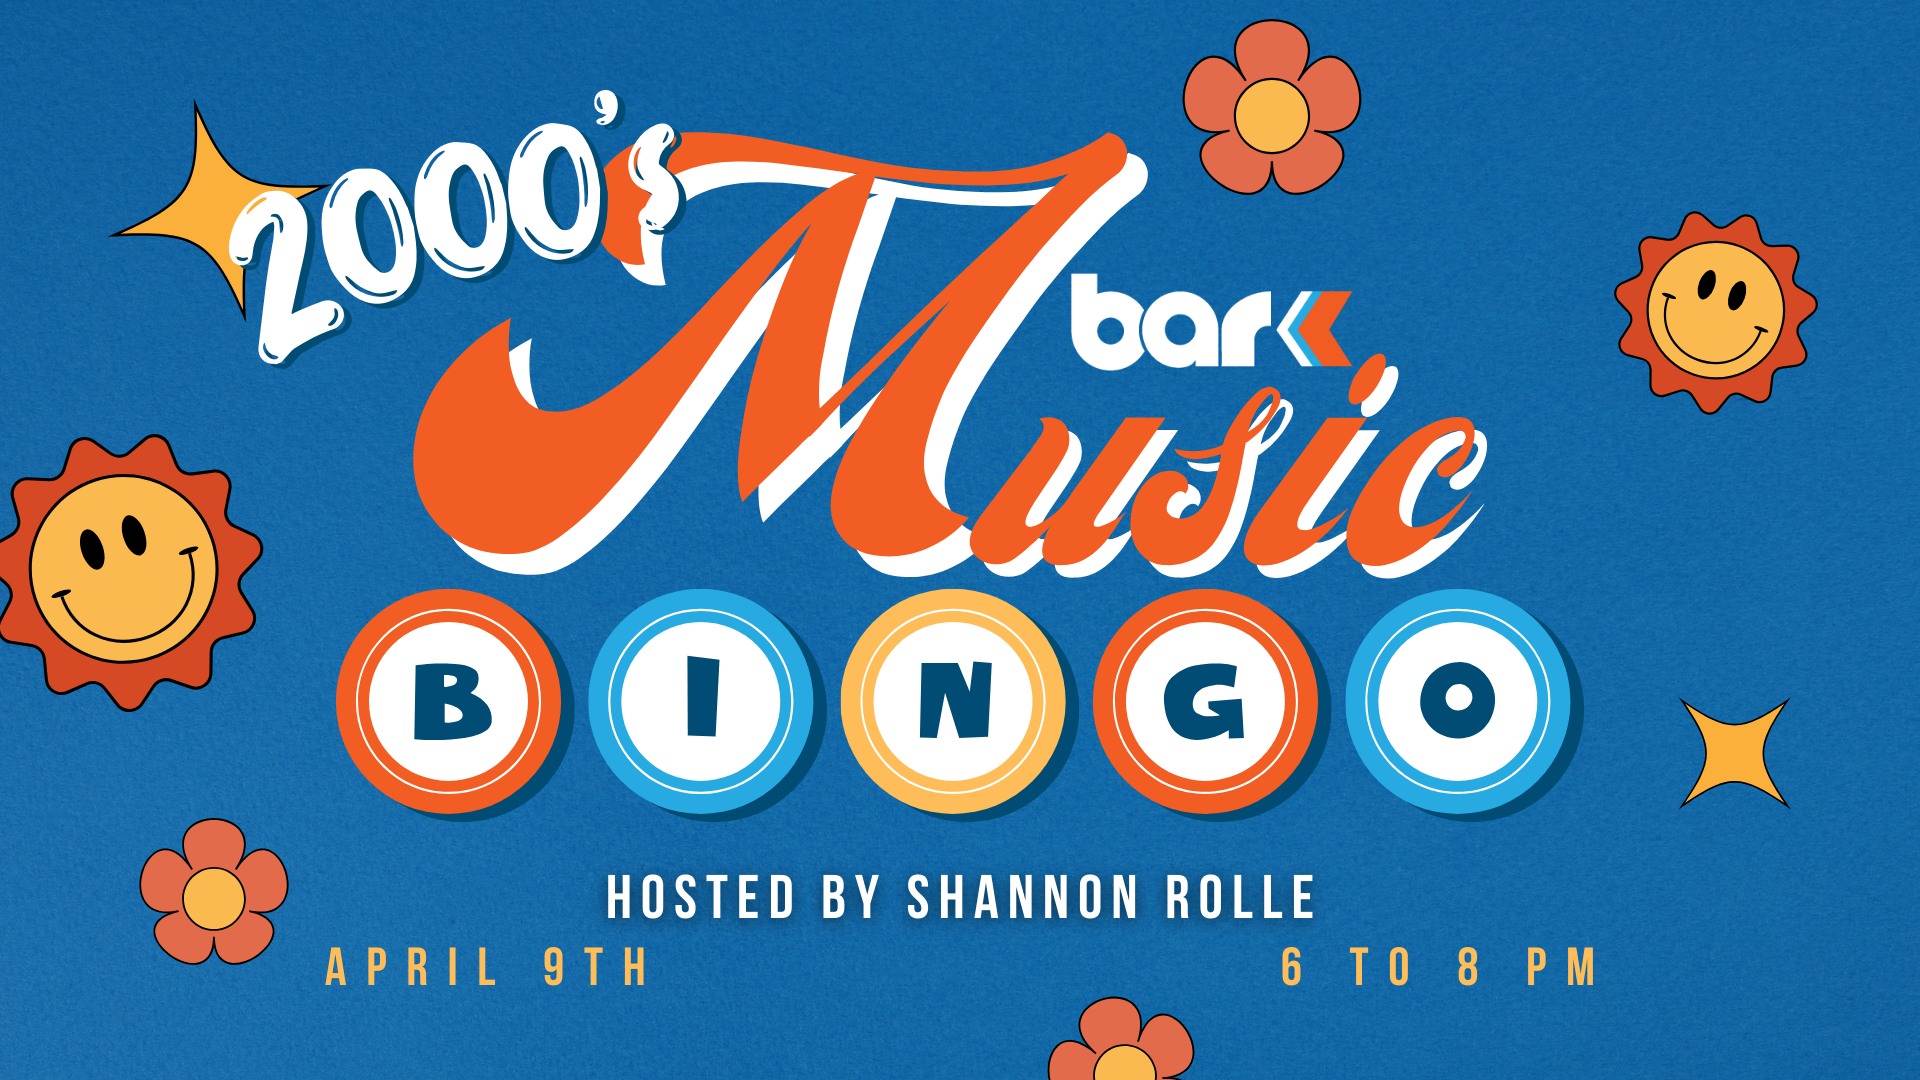 2000's music bingo at bar k. Hosted by shannon rolle on April, 9th from 6 to 8 pm.